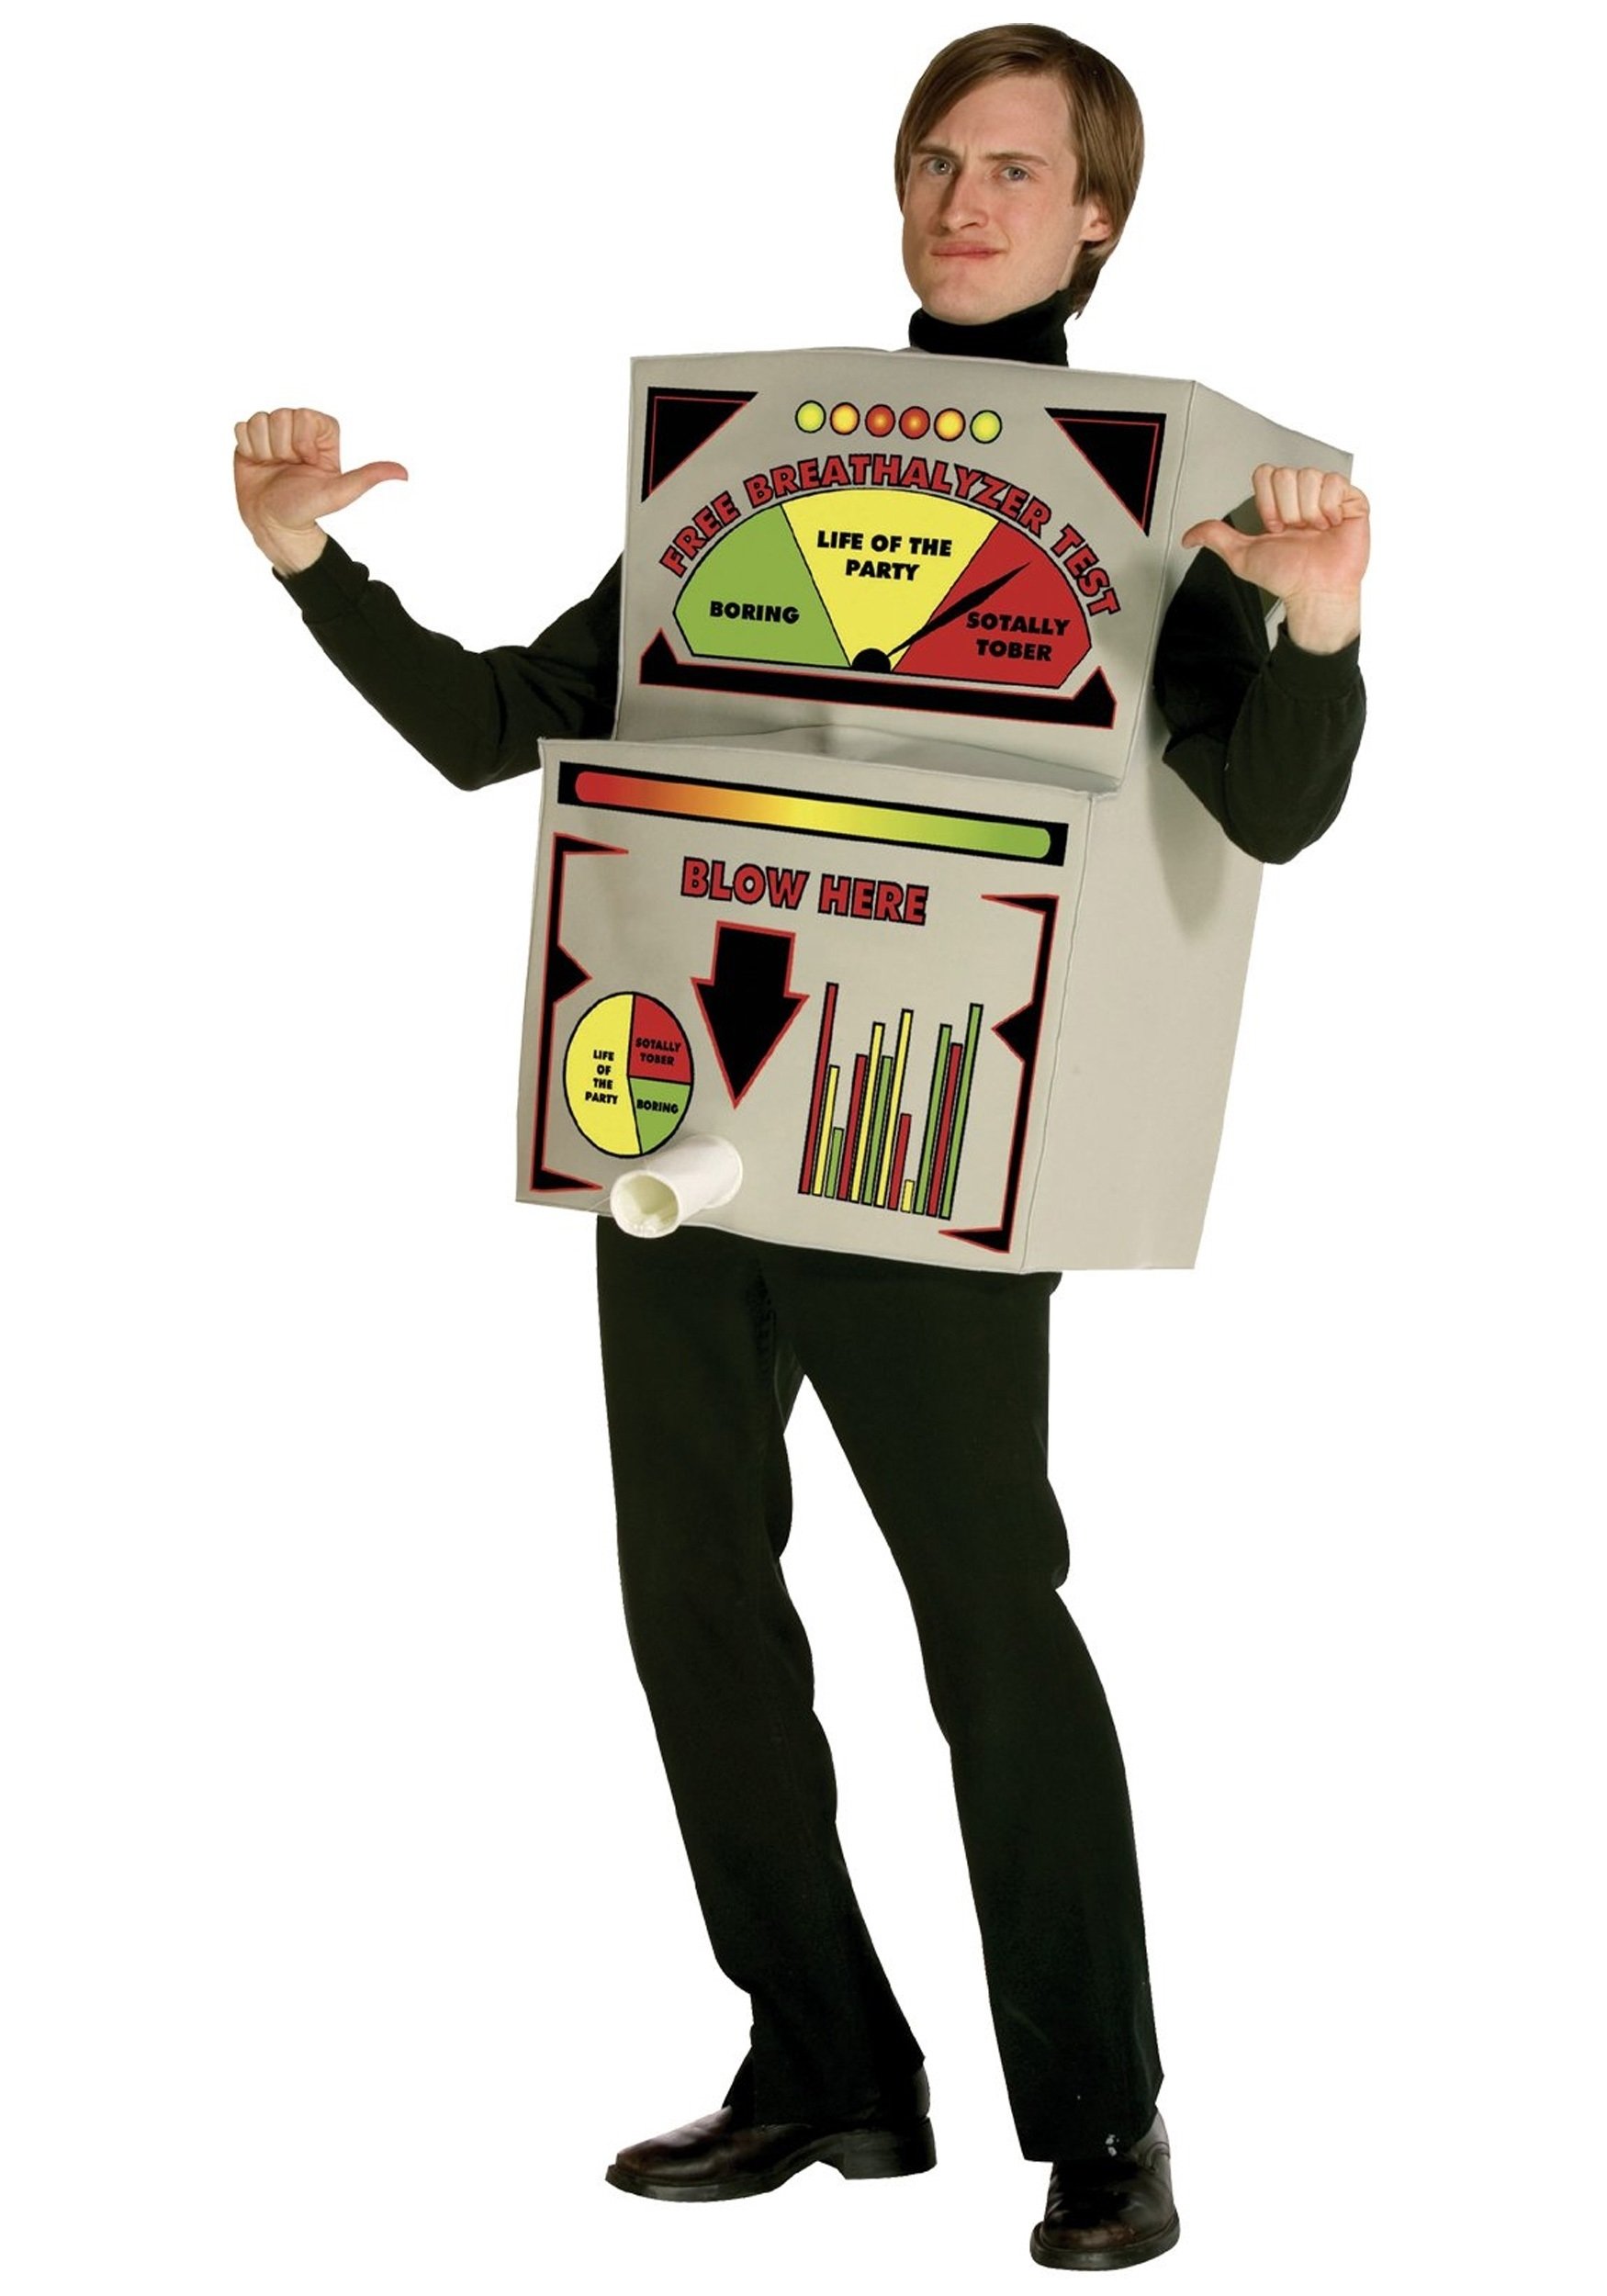 10 Perfect Funny Costume Ideas For Men breathalyzer costume funny halloween costume ideas for men 3 2022